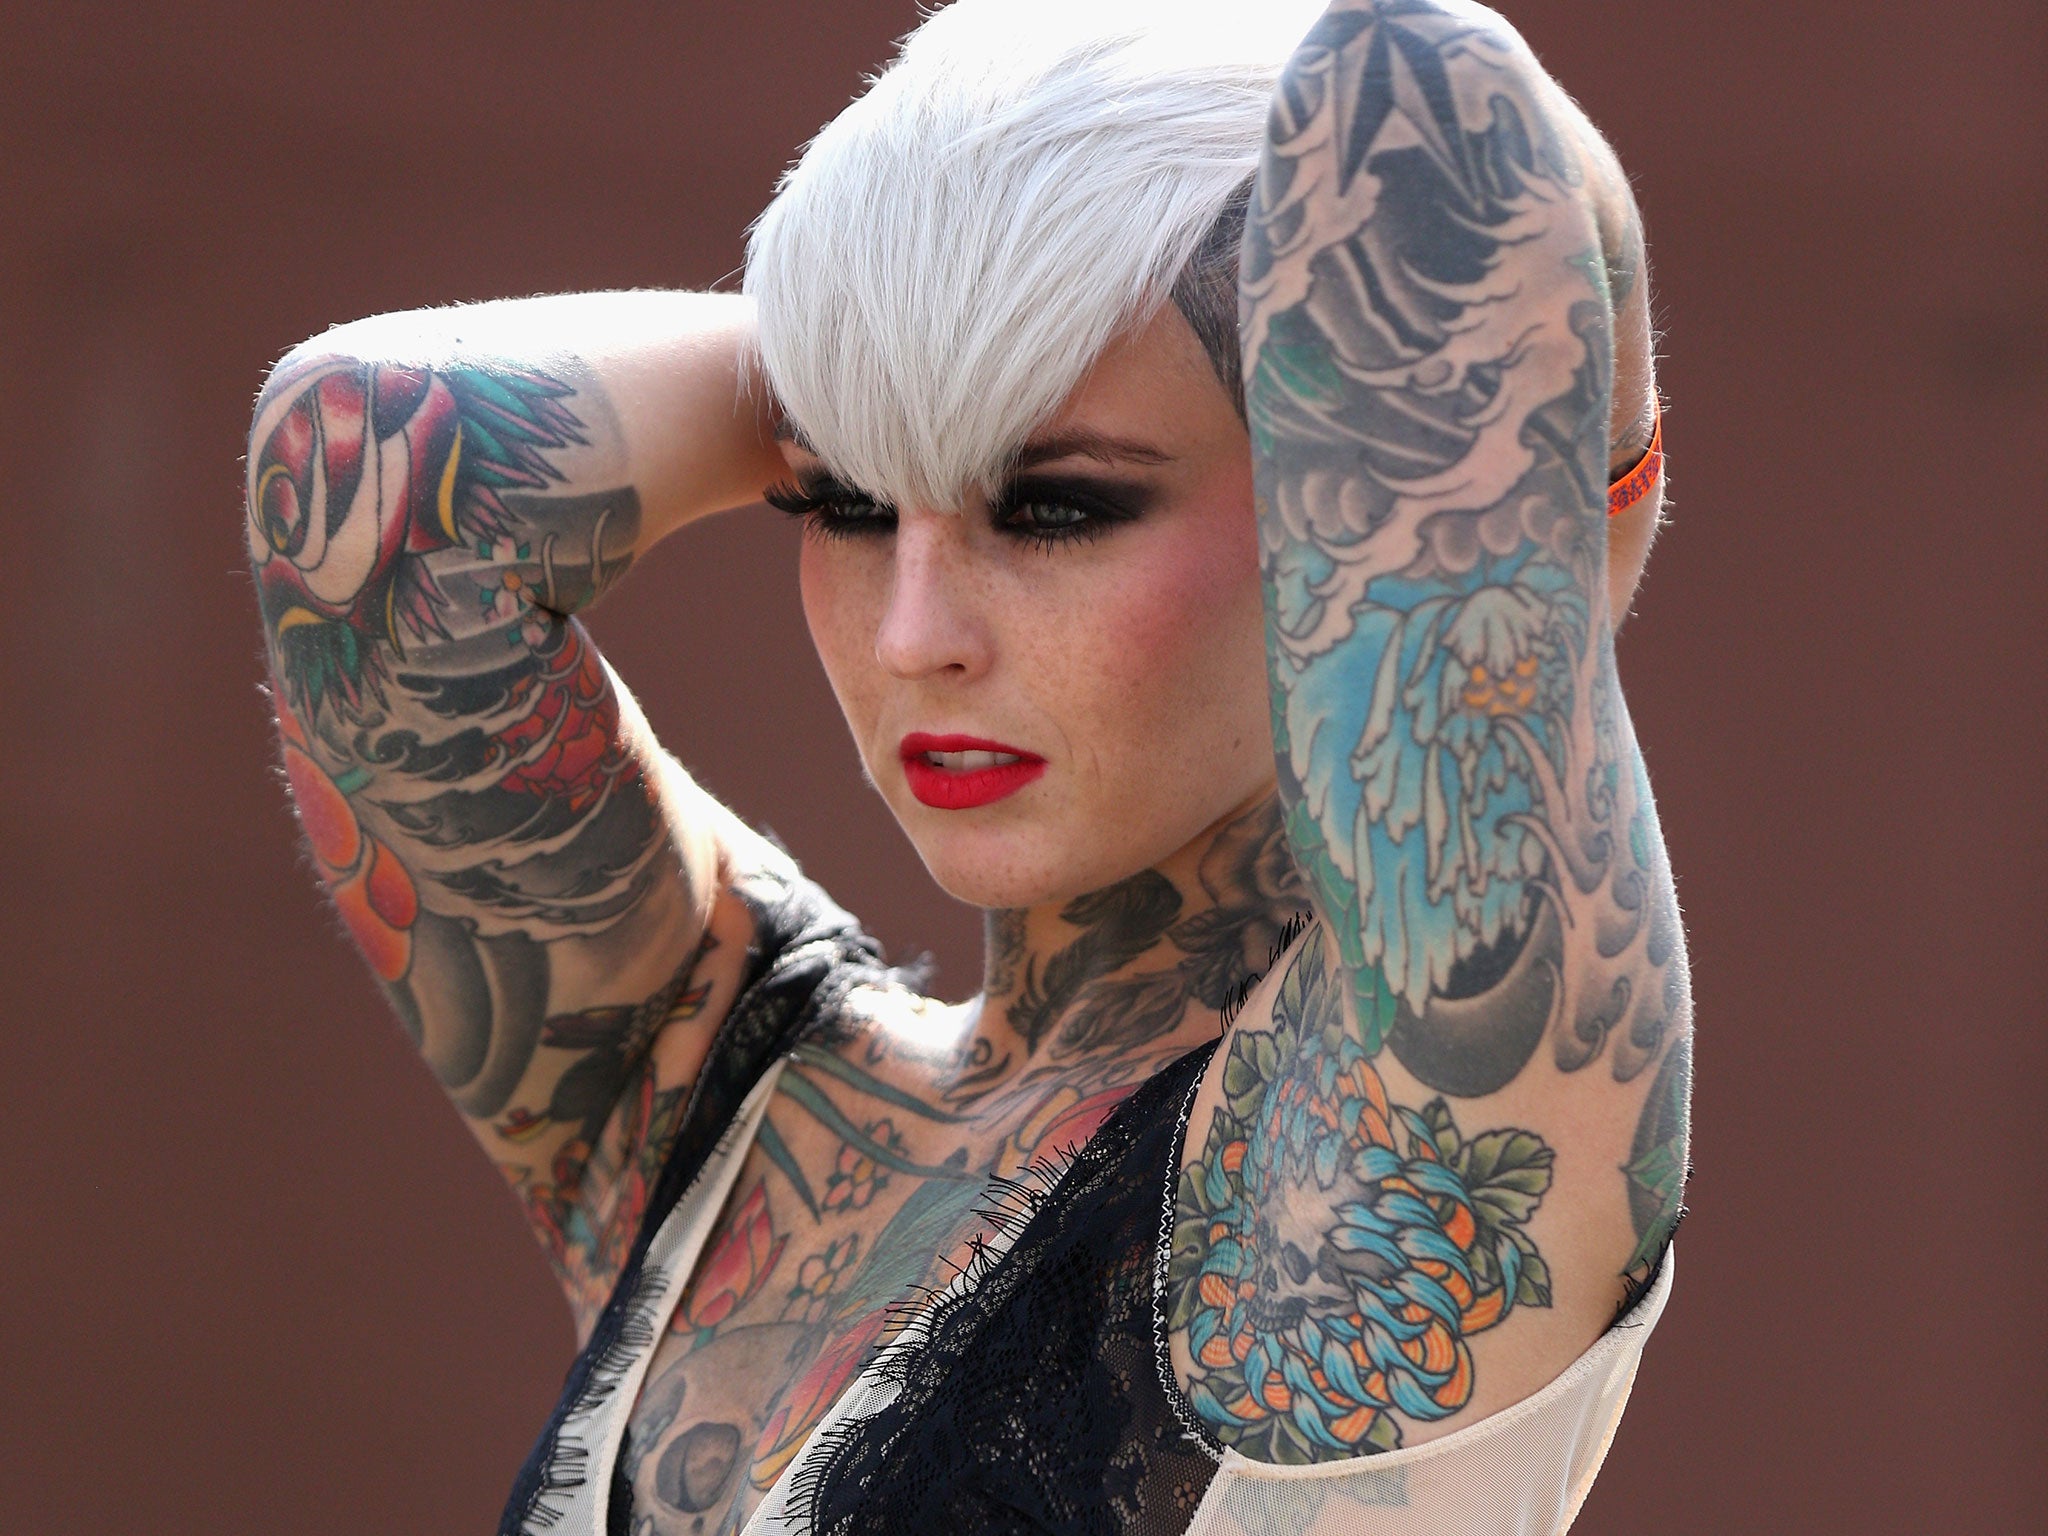 Tattoos can cause cancer – with one colour potentially more toxic than others, study says